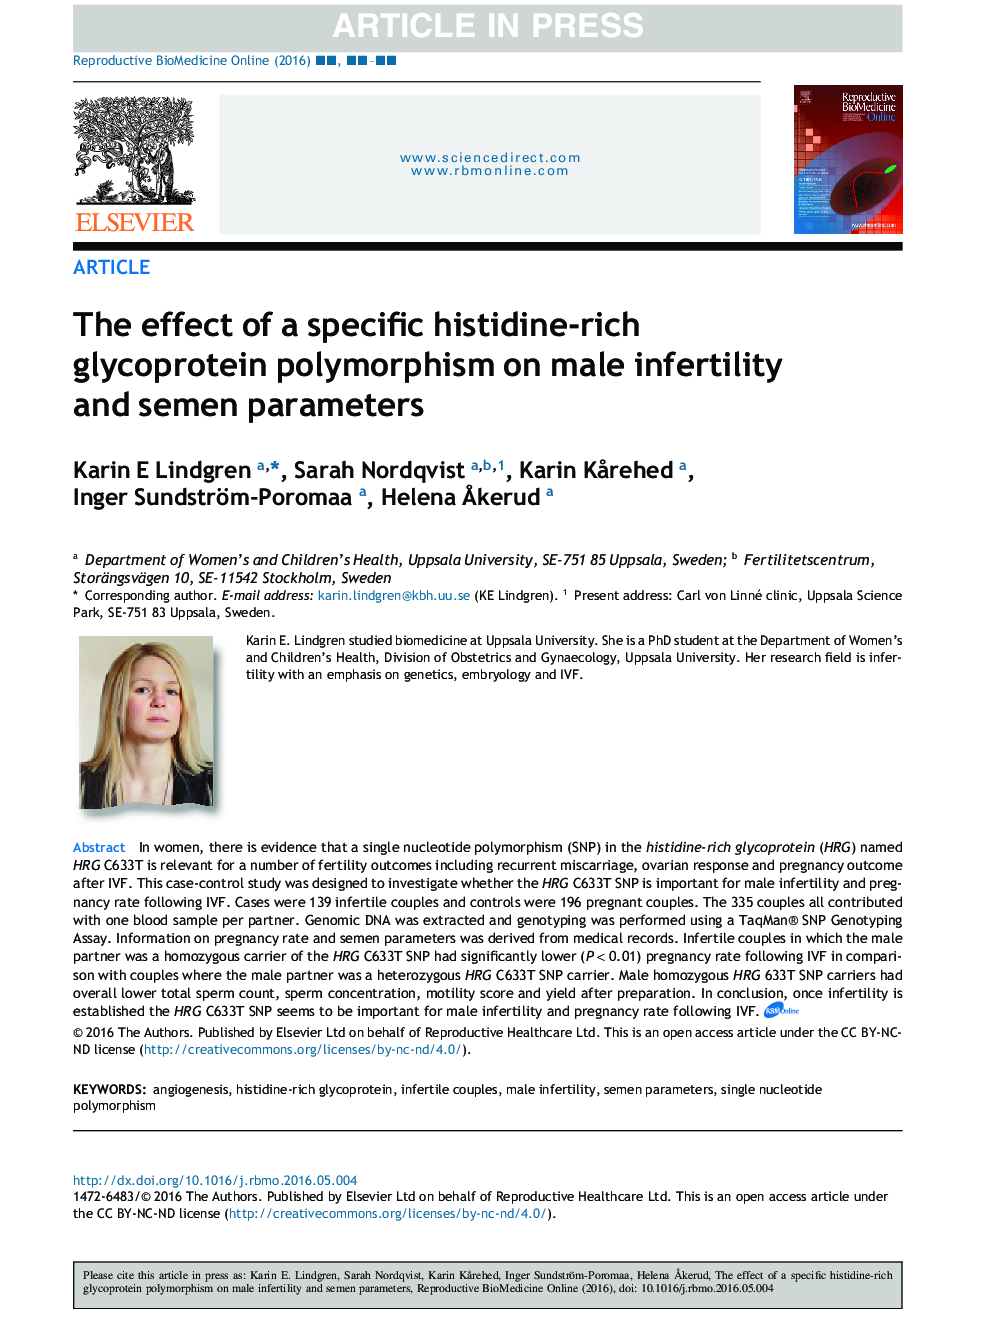 The effect of a specific histidine-rich glycoprotein polymorphism on male infertility and semen parameters